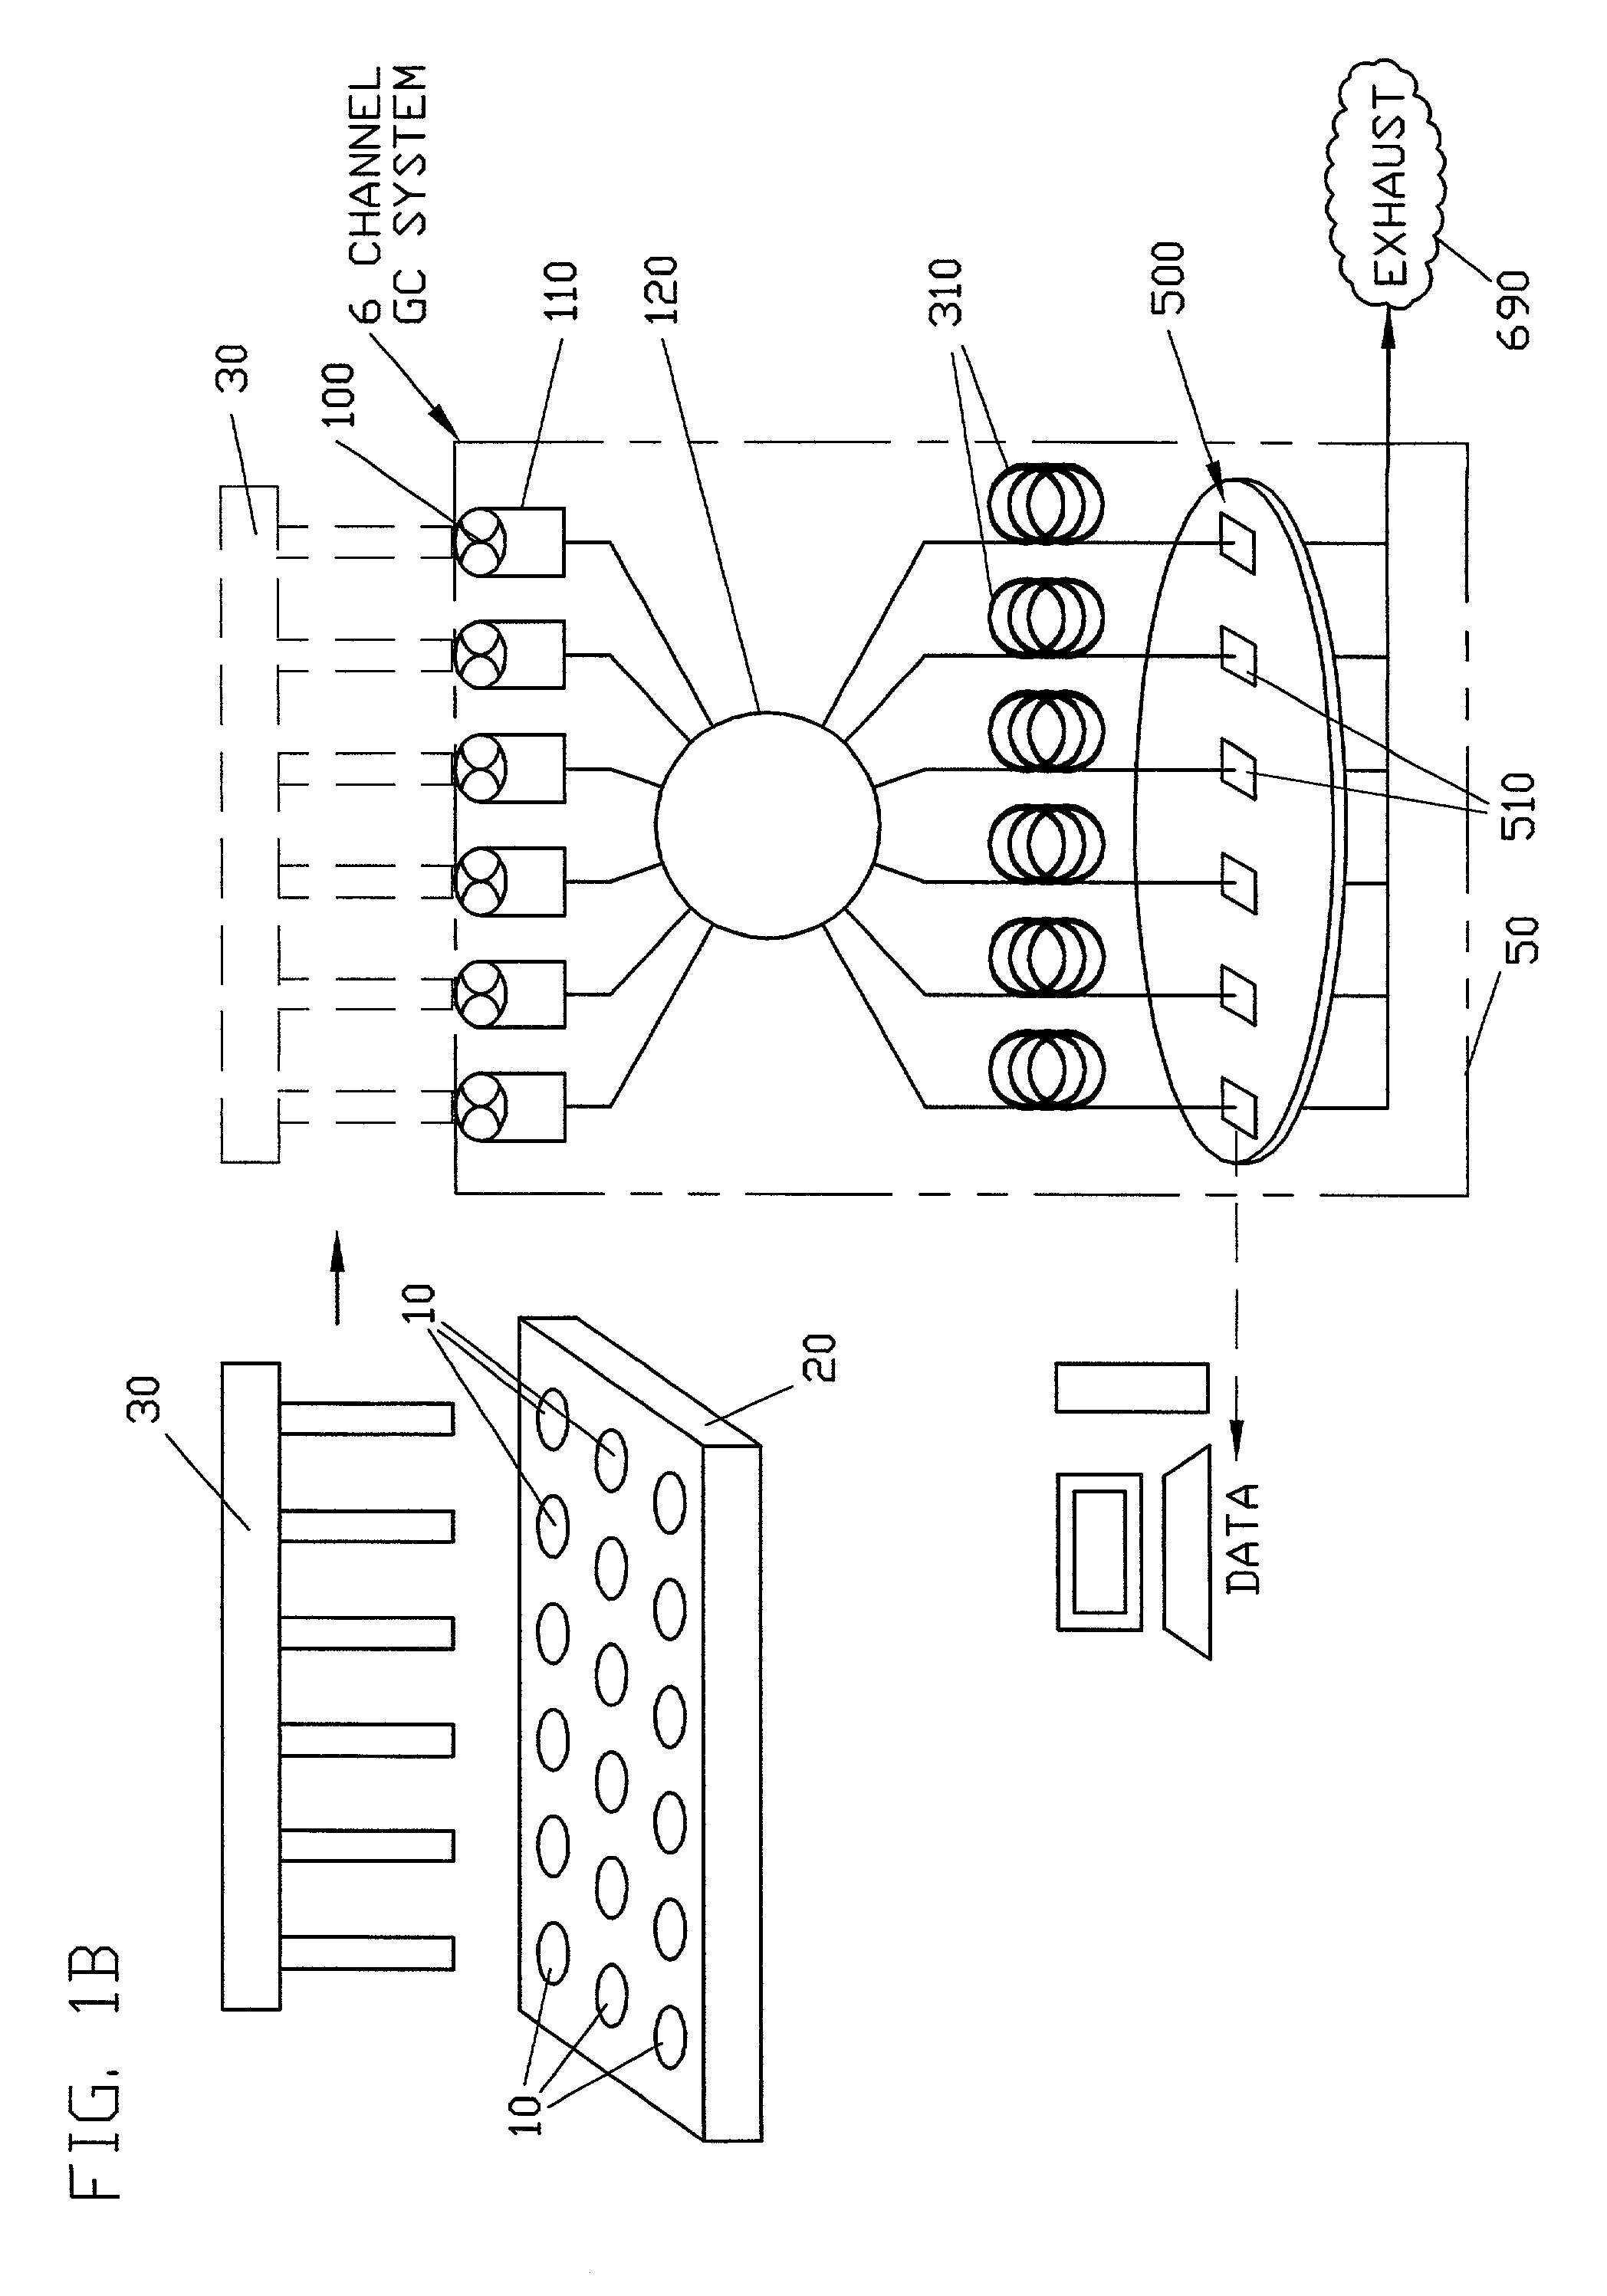 Parallel gas chromatograph with microdetector array